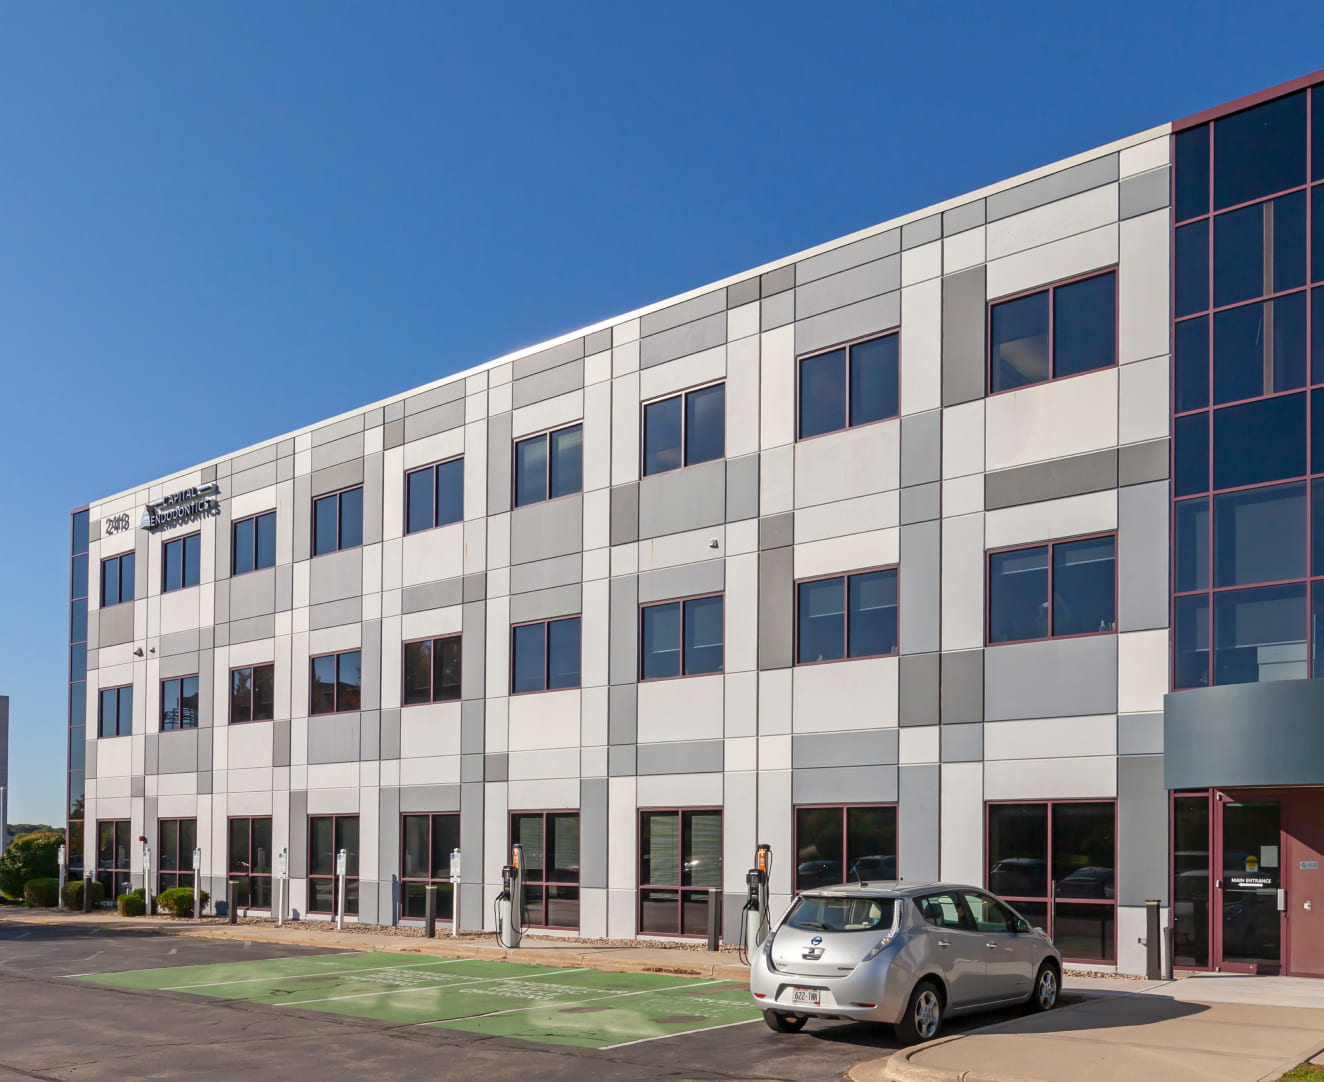 The front exterior of the office building at 2418 Crossroads Drive in Madison, WI.